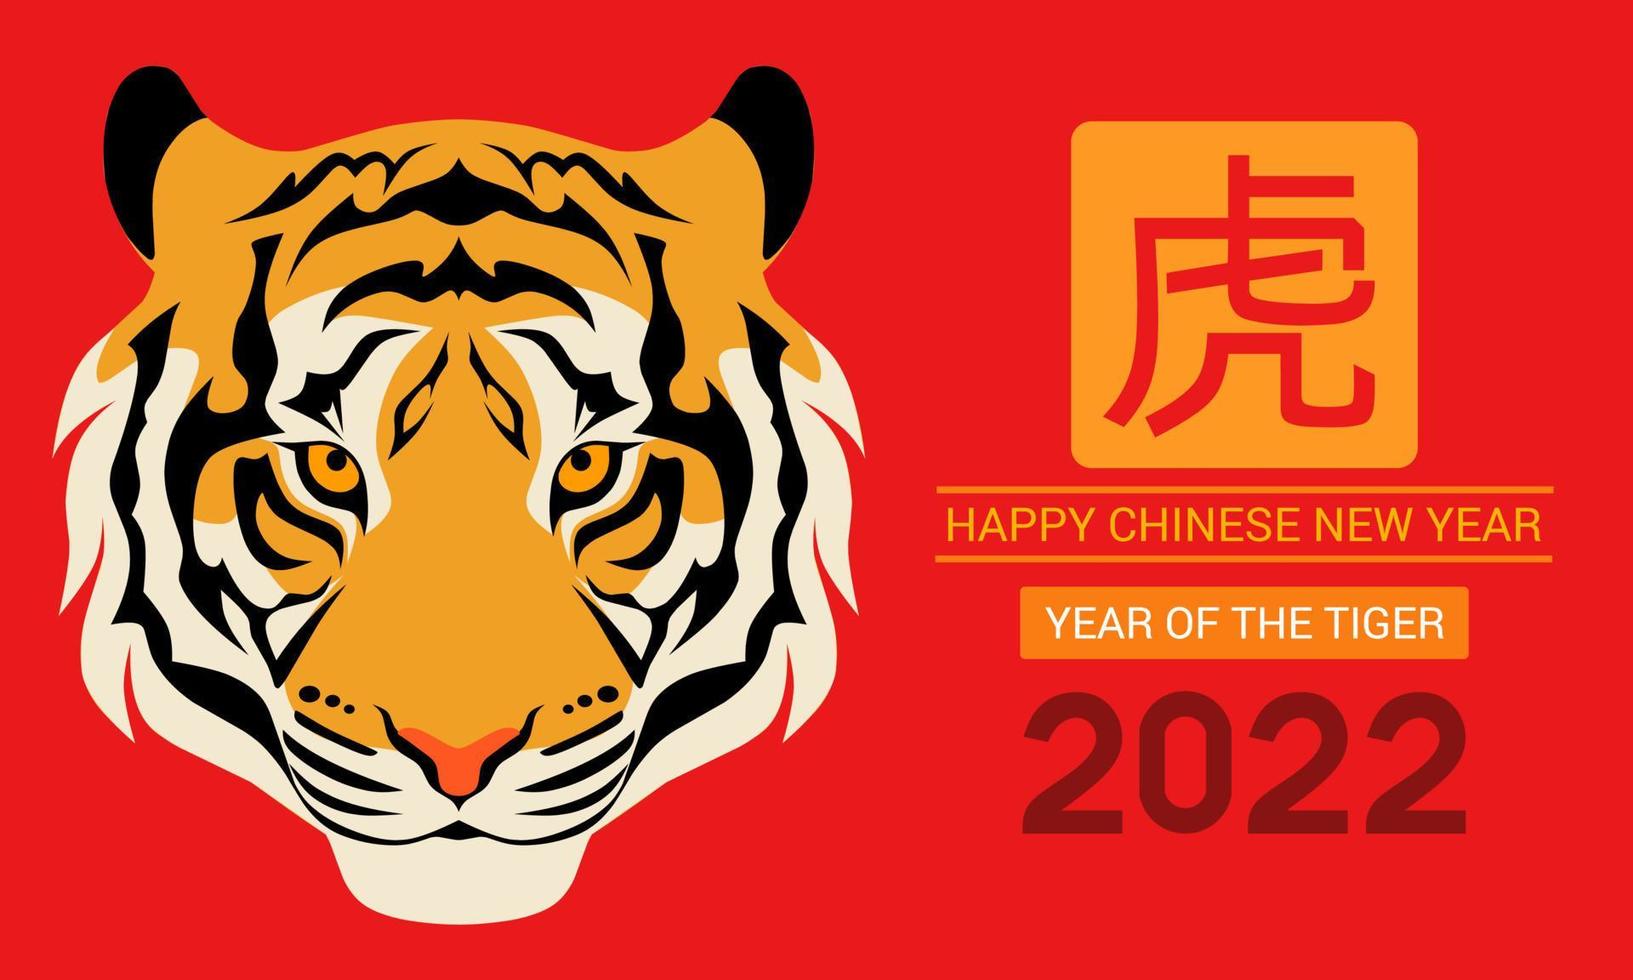 Chinese new year 2022, year of the Tiger. Happy Chinese new year modern art design for greeting card, poster, website banner with tiger. Translation -Tiger vector